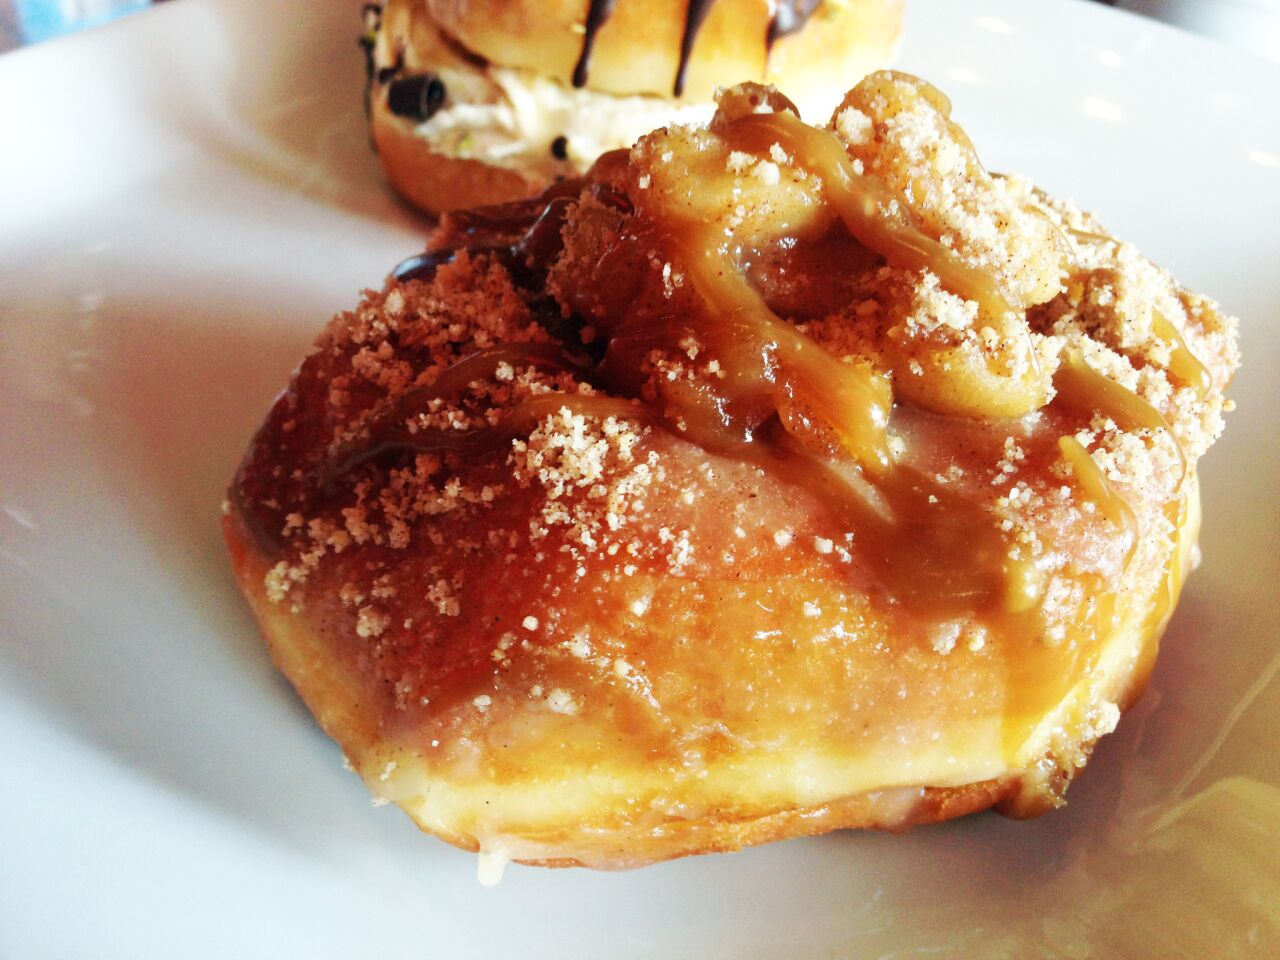 The apple crumb doughnut with Speculoos caramel.